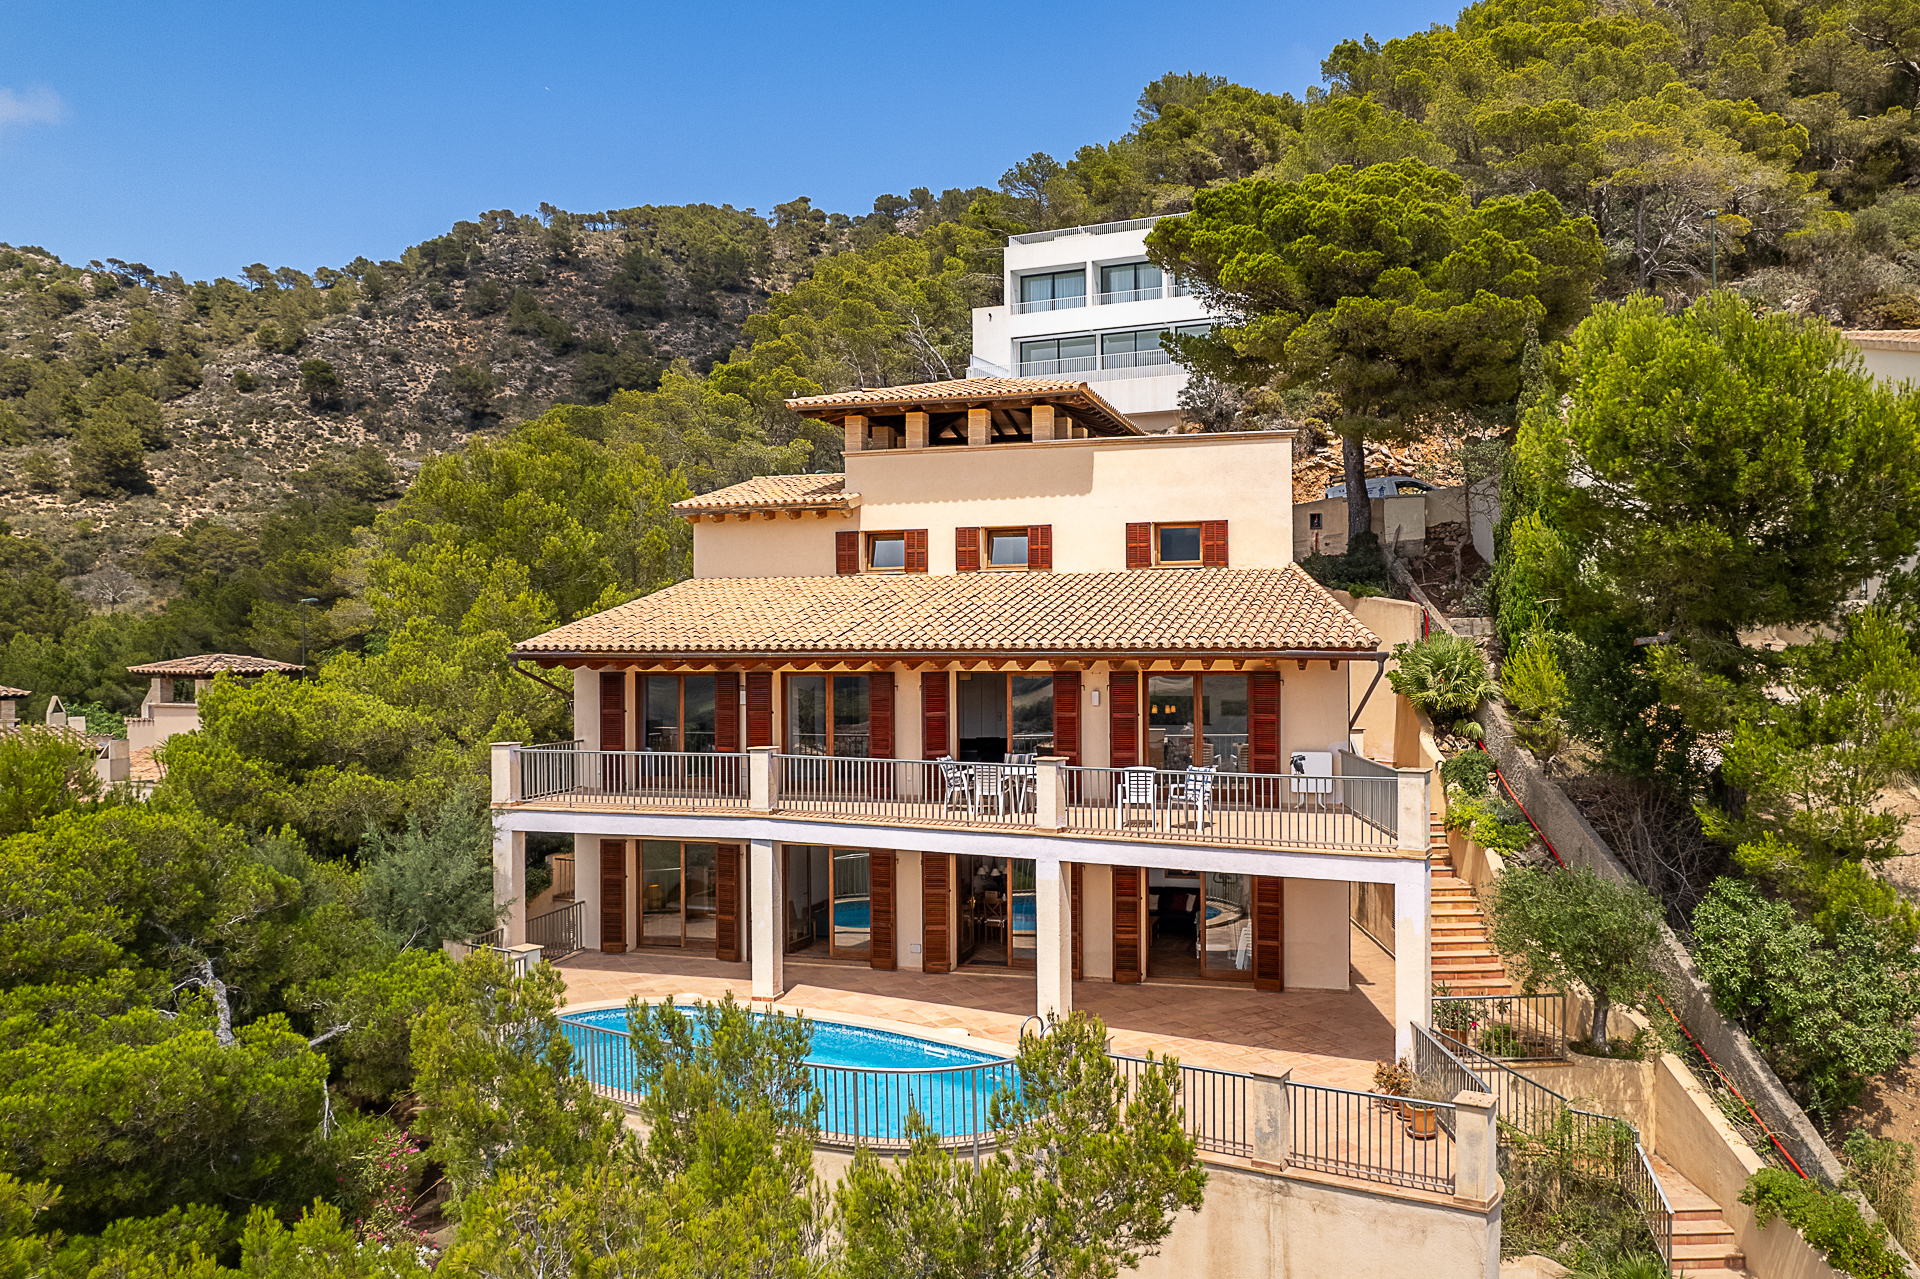 Exclusive villa on a hillside: panoramic views, pool, garage and generous living space, 07589 Canyamel (Spain), Villa